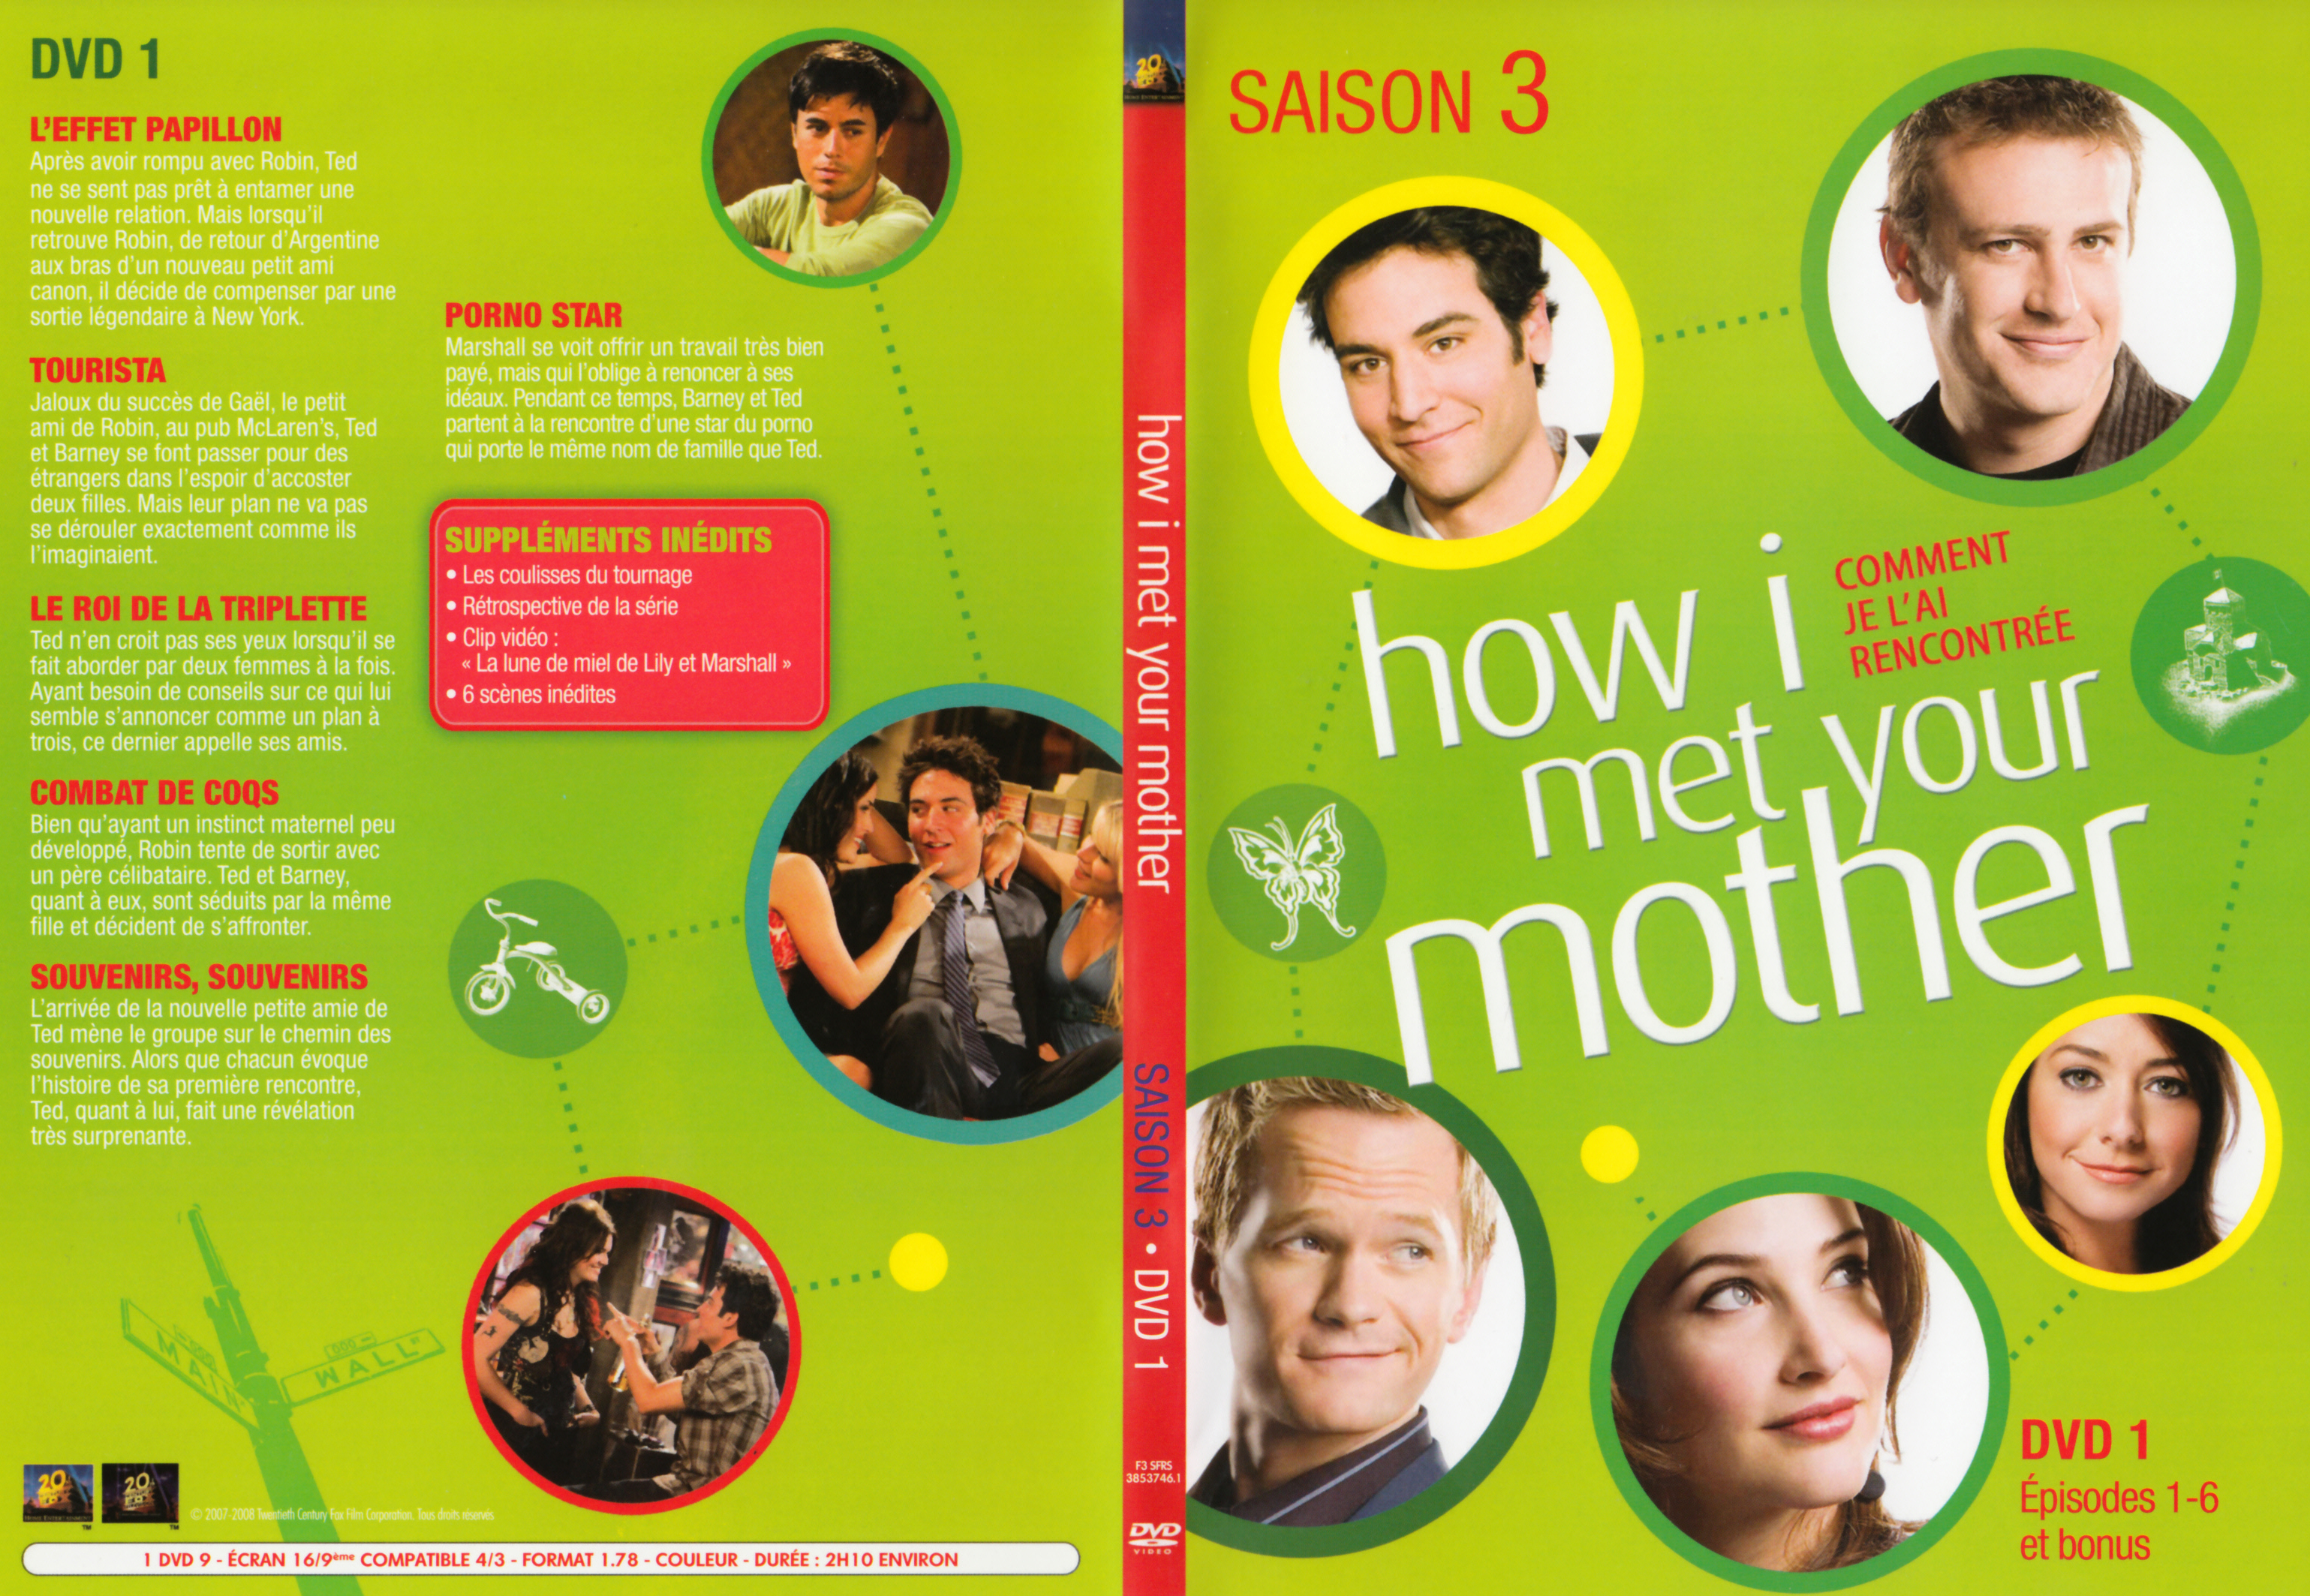 Jaquette DVD How i met your mother Saison 3 DVD 1